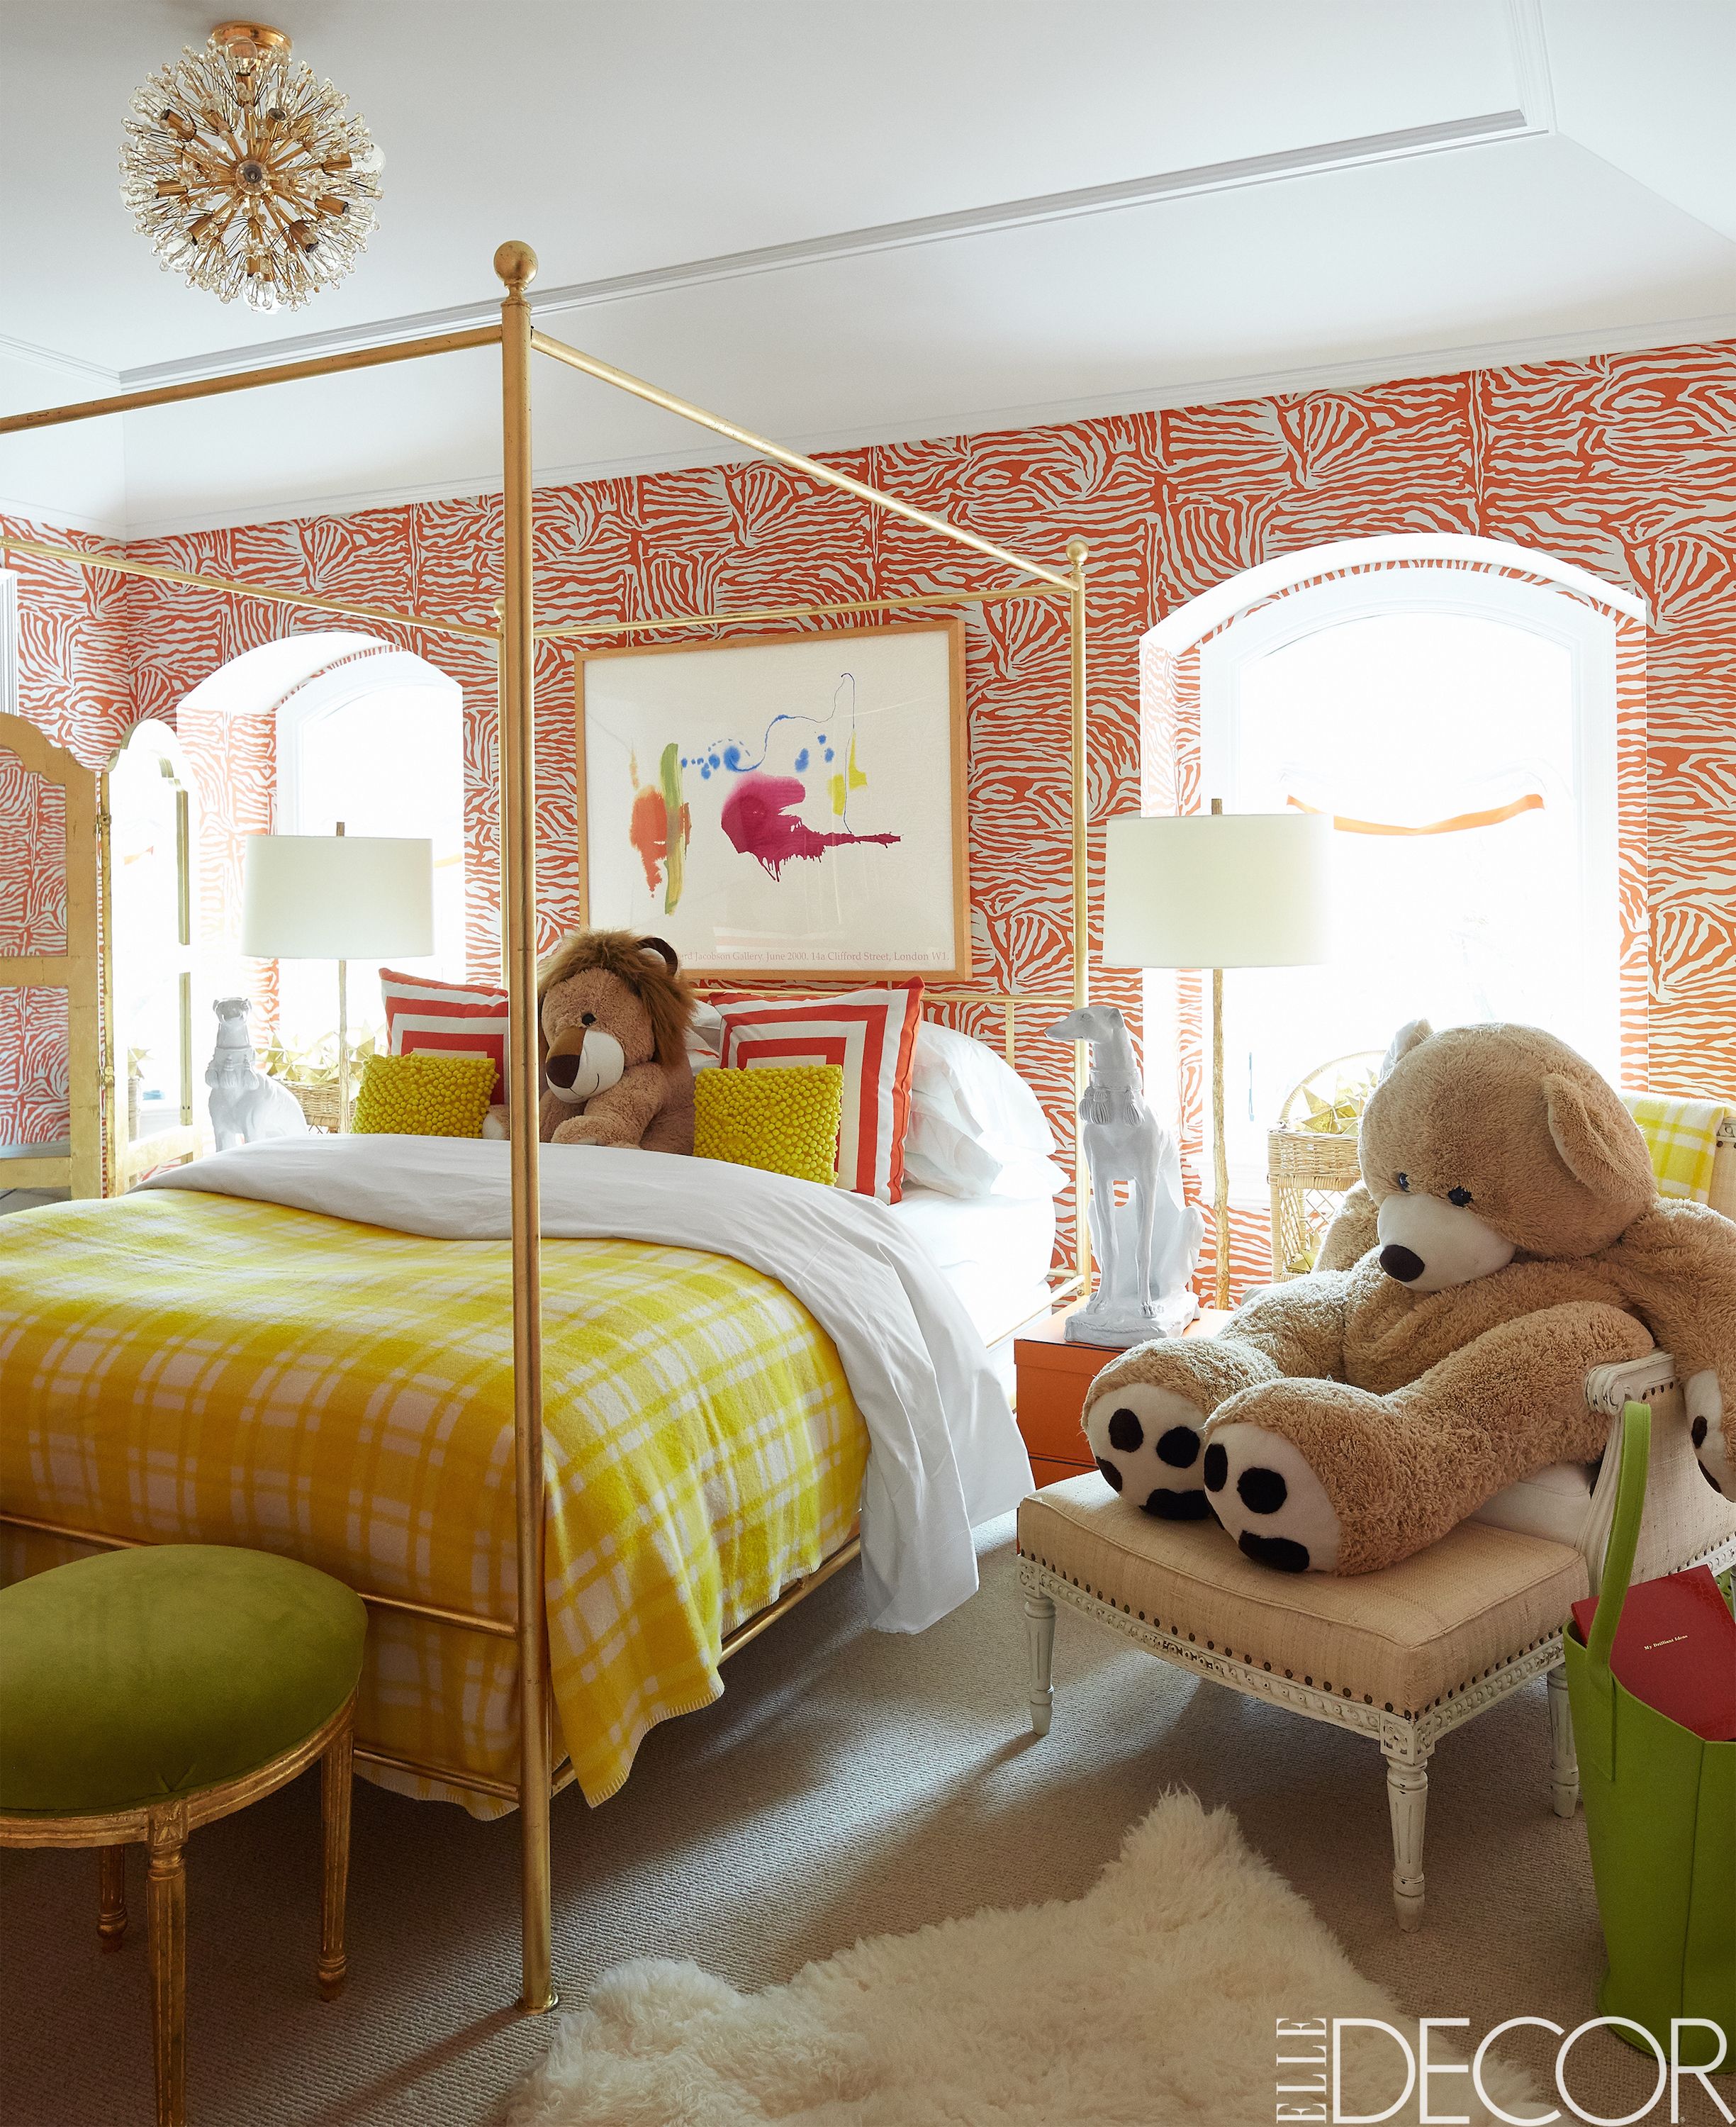 20 Creative Girls Room Ideas - How to Decorate a Girl\'s Bedroom